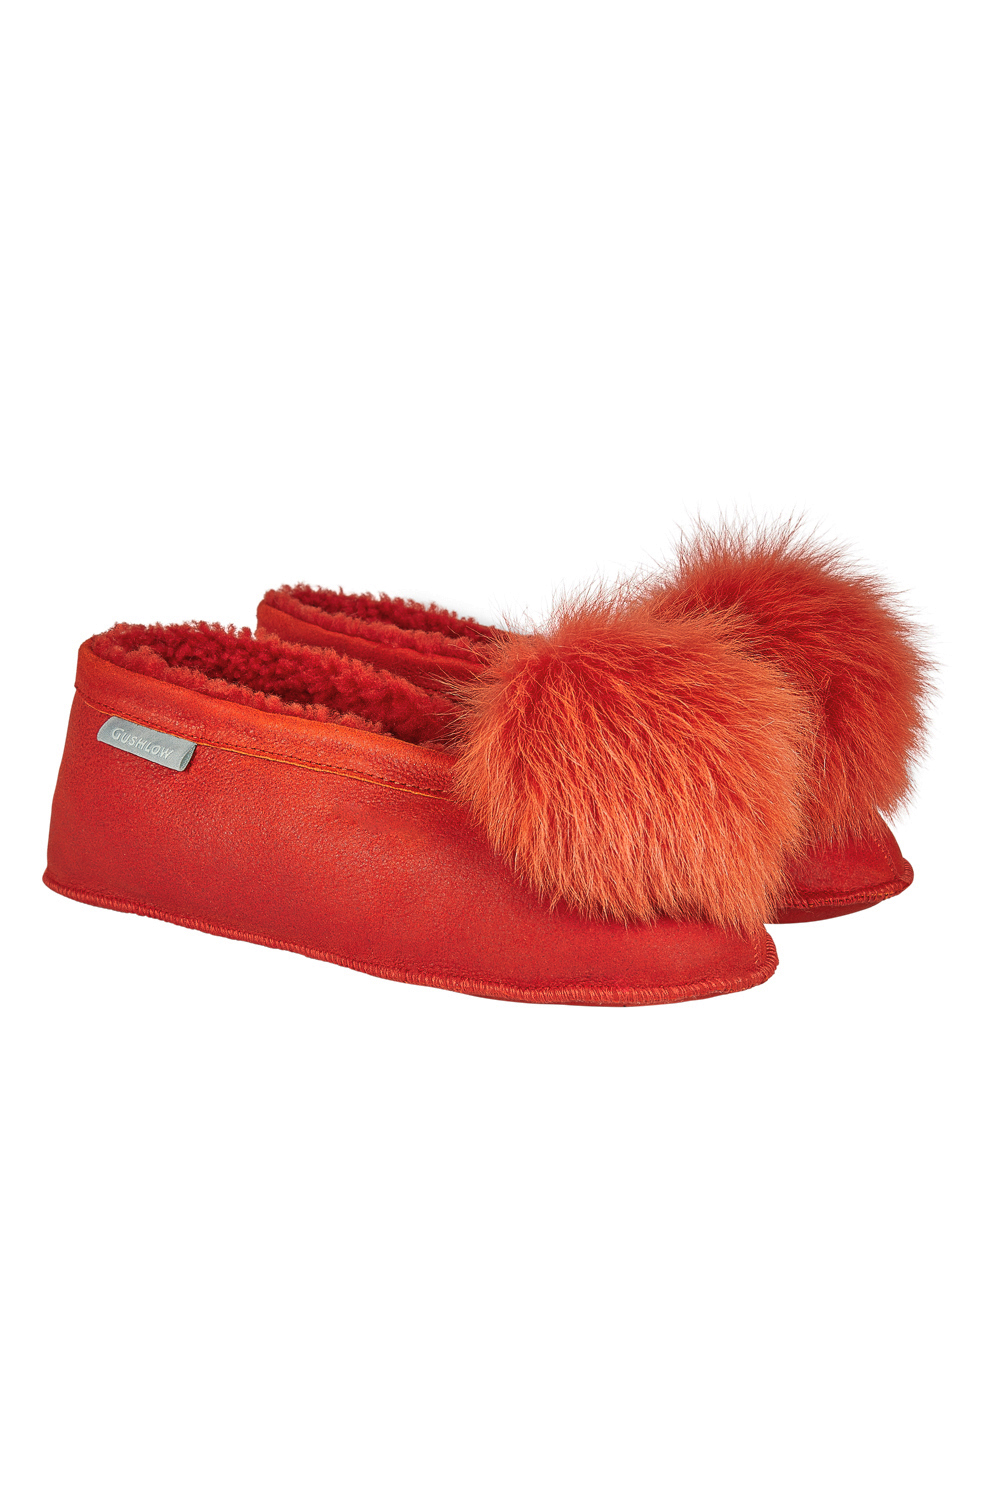 Margot Red Shearling Slippers | Women | Gushlow & Cole - side double